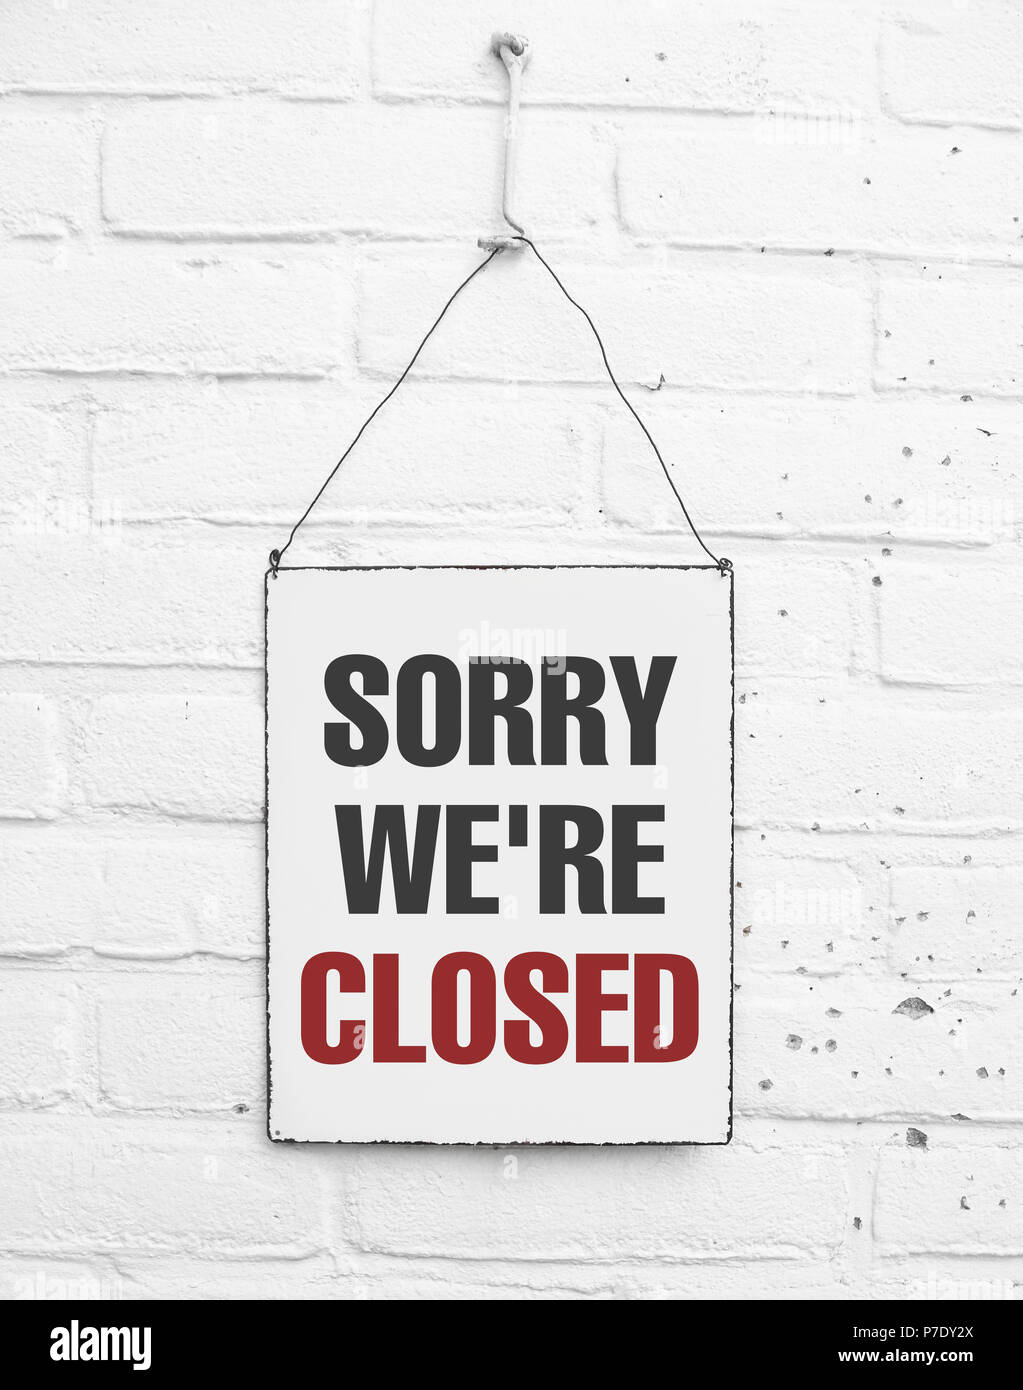 Sorry we're closed sign metal plate banner on white brick background Stock Photo